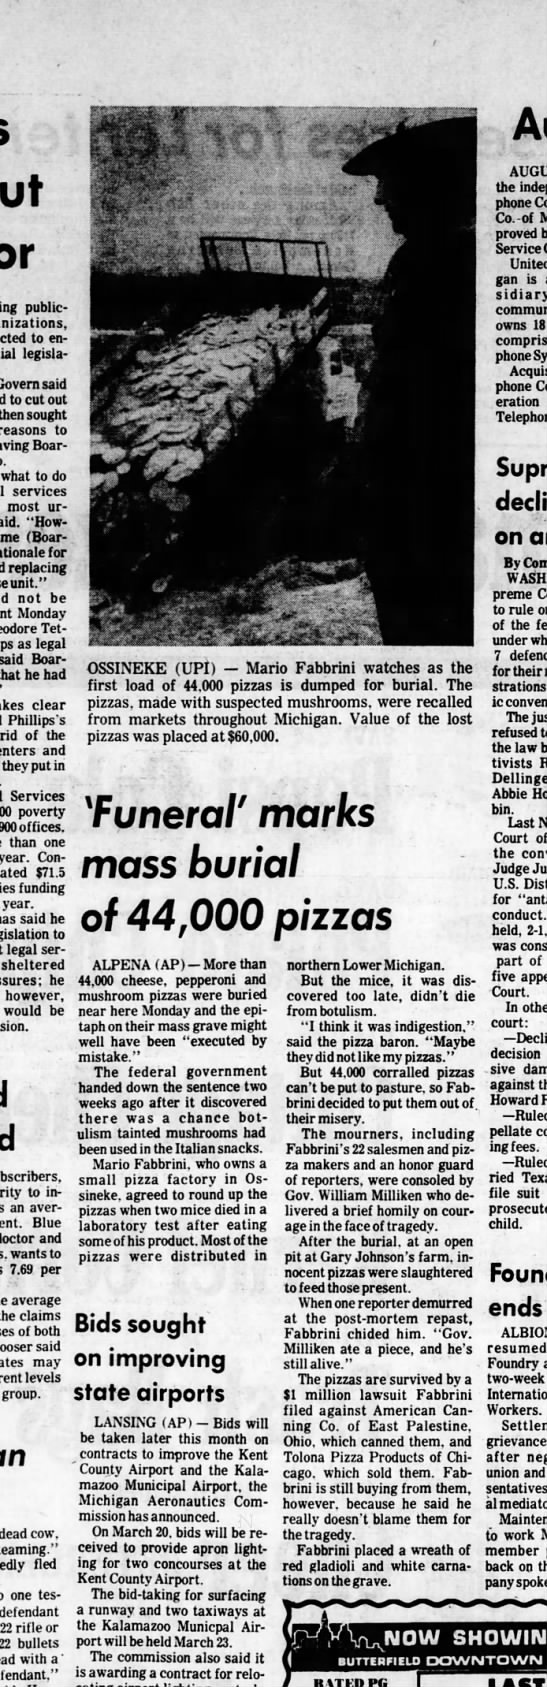 'Funeral' marks mass burial of 44,000 pizzas - 